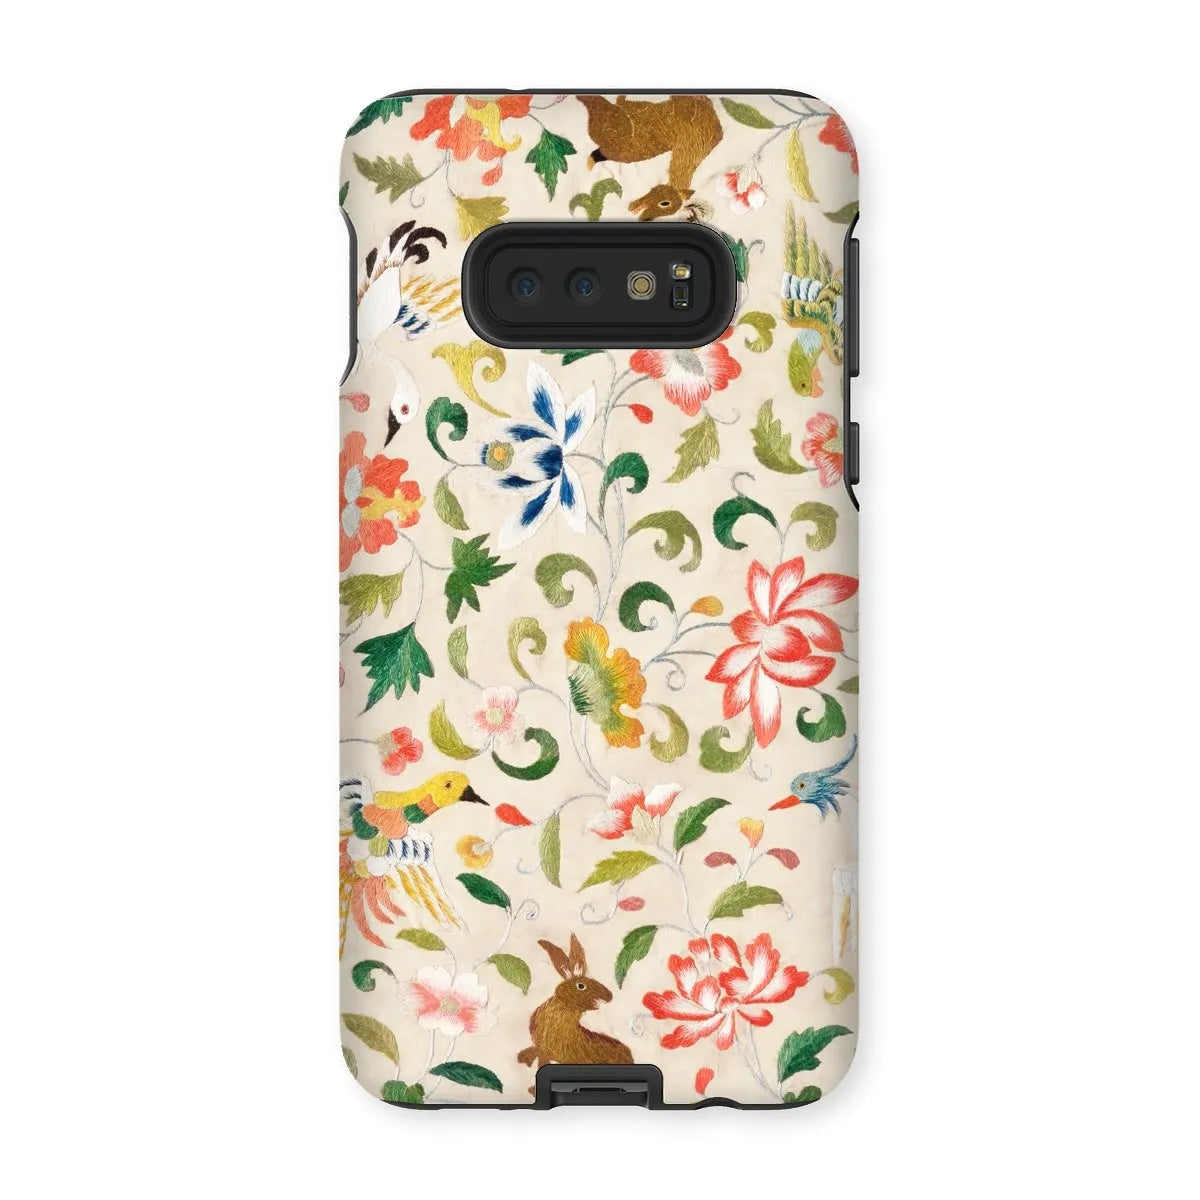 Crittersweet Symphony Tough Phone Case - Samsung Galaxy S10e / Matte - Mobile Phone Cases - Aesthetic Art